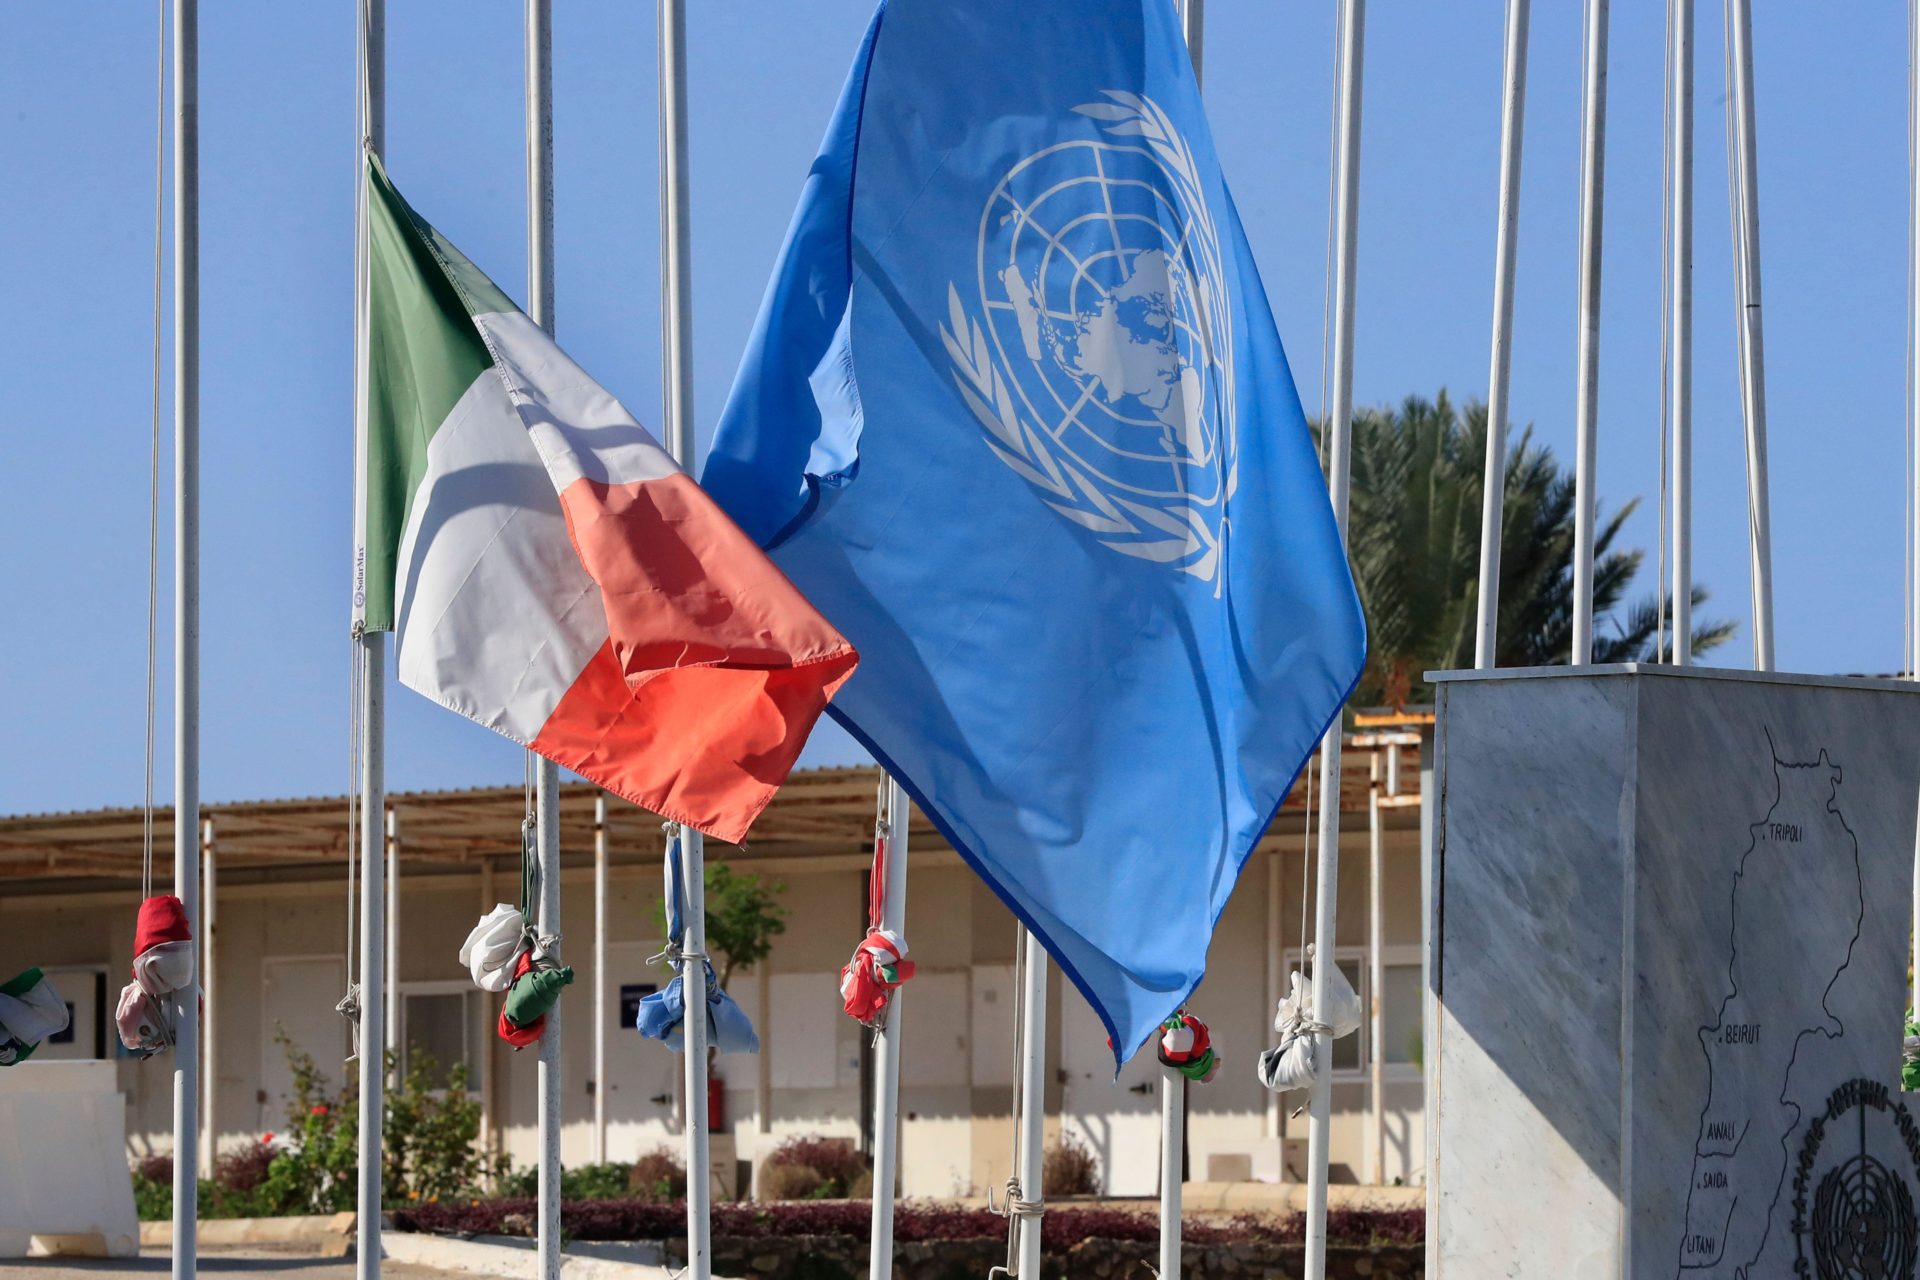 2M9H8H5 The United Nations and the Ireland flags fly at half-staff, at the UNIFIL headquarters in the southern Lebanese town of Naqoura, Lebanon, Friday Dec. 16, 2022. On Thursday Dec. 15, 2022, an Irish U.N. peacekeeper has been killed and several others were wounded when unidentified attackers fired at a convoy in southern Lebanon, a traditional stronghold of the militant Hezbollah group.(AP Photo/Mohammed Zaatari)